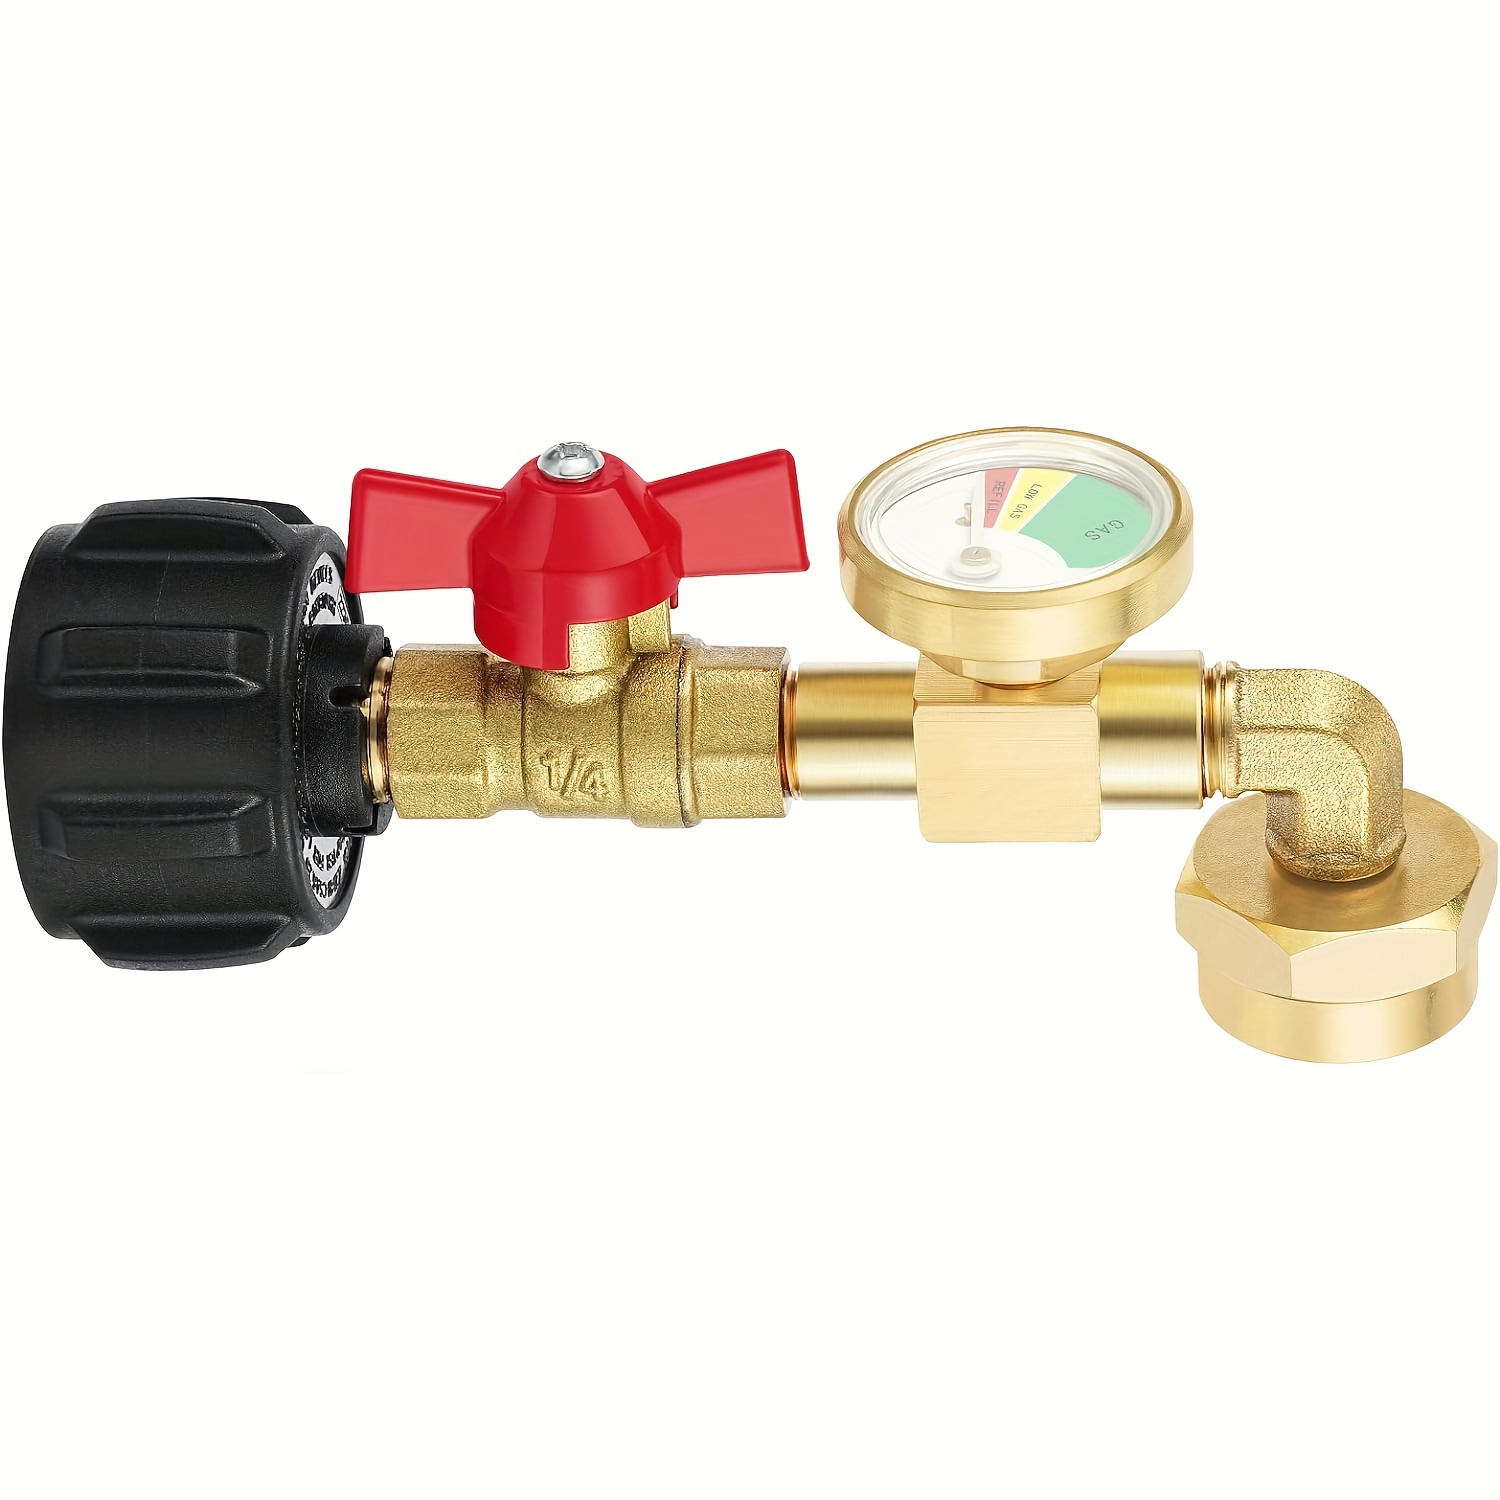 

Propane Adapter 1lb To 20lb, Qcc1 Propane Refill Elbow Adapter With Gauge And On-off Control Valve For 1lb Propane Tank To Be Refilled Gas From 5~40 Lb Propane Tank